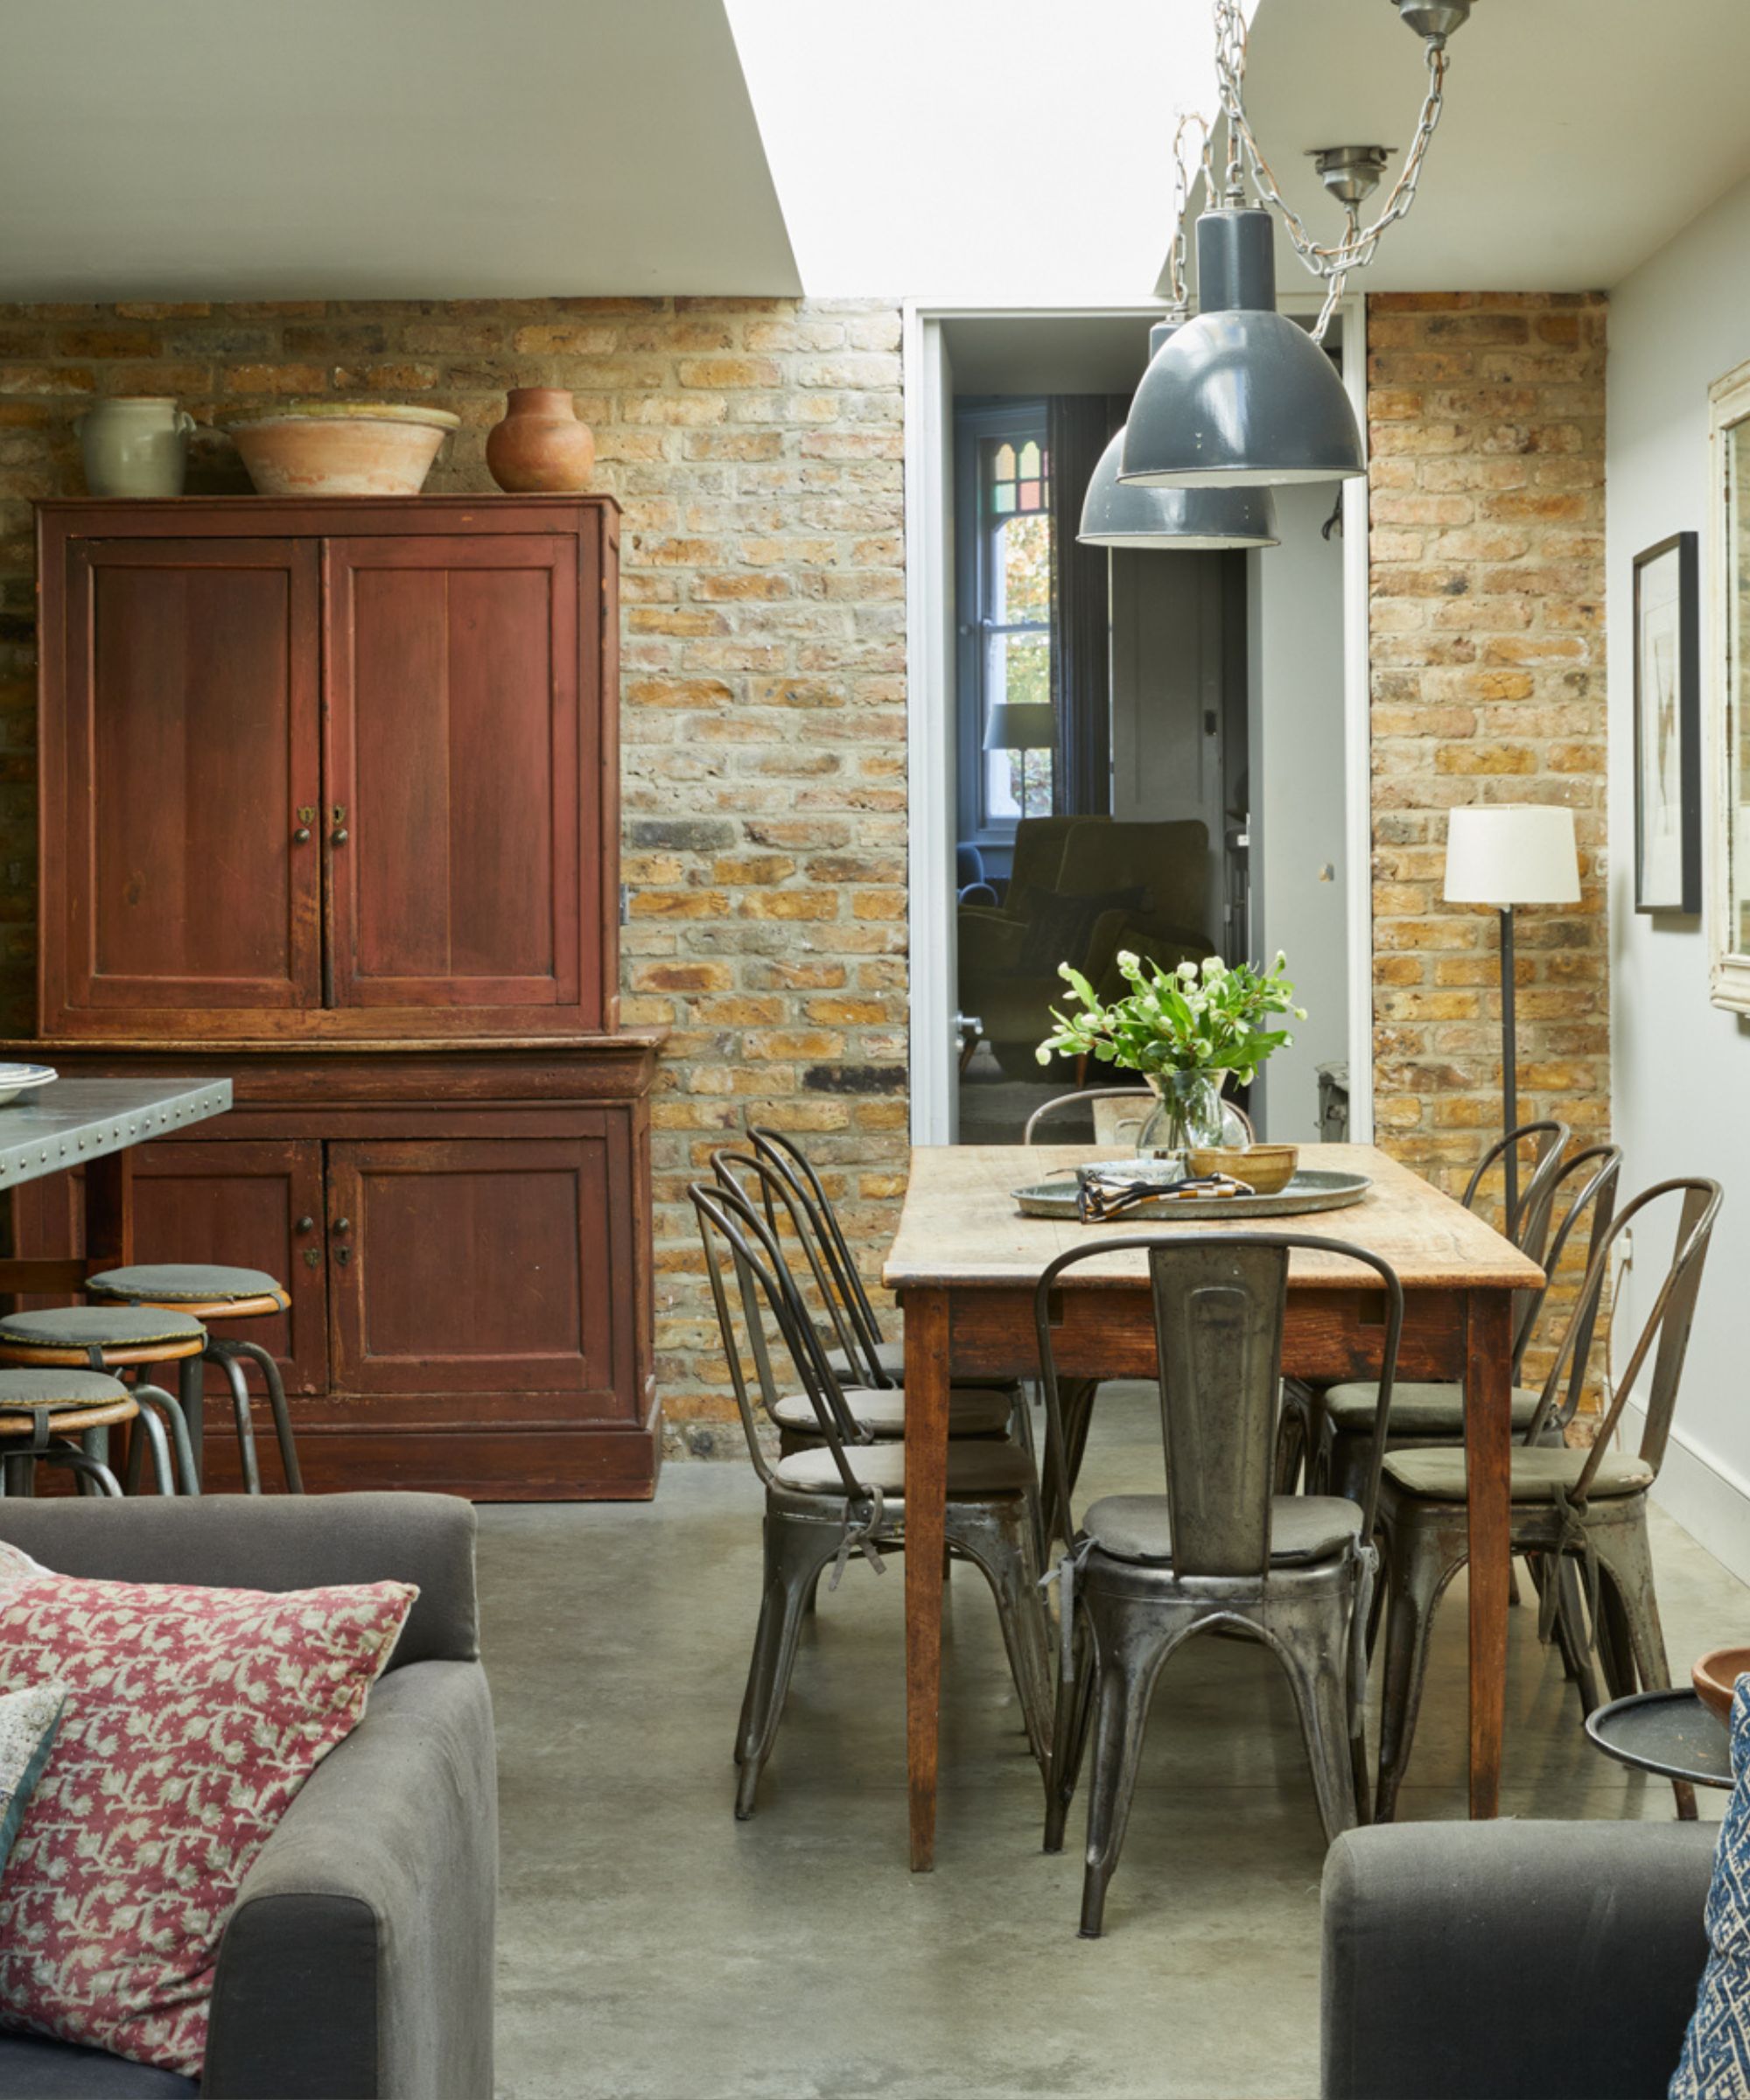 Cave Interiors kitchen with industrial pendant lights and metal cafe chairs